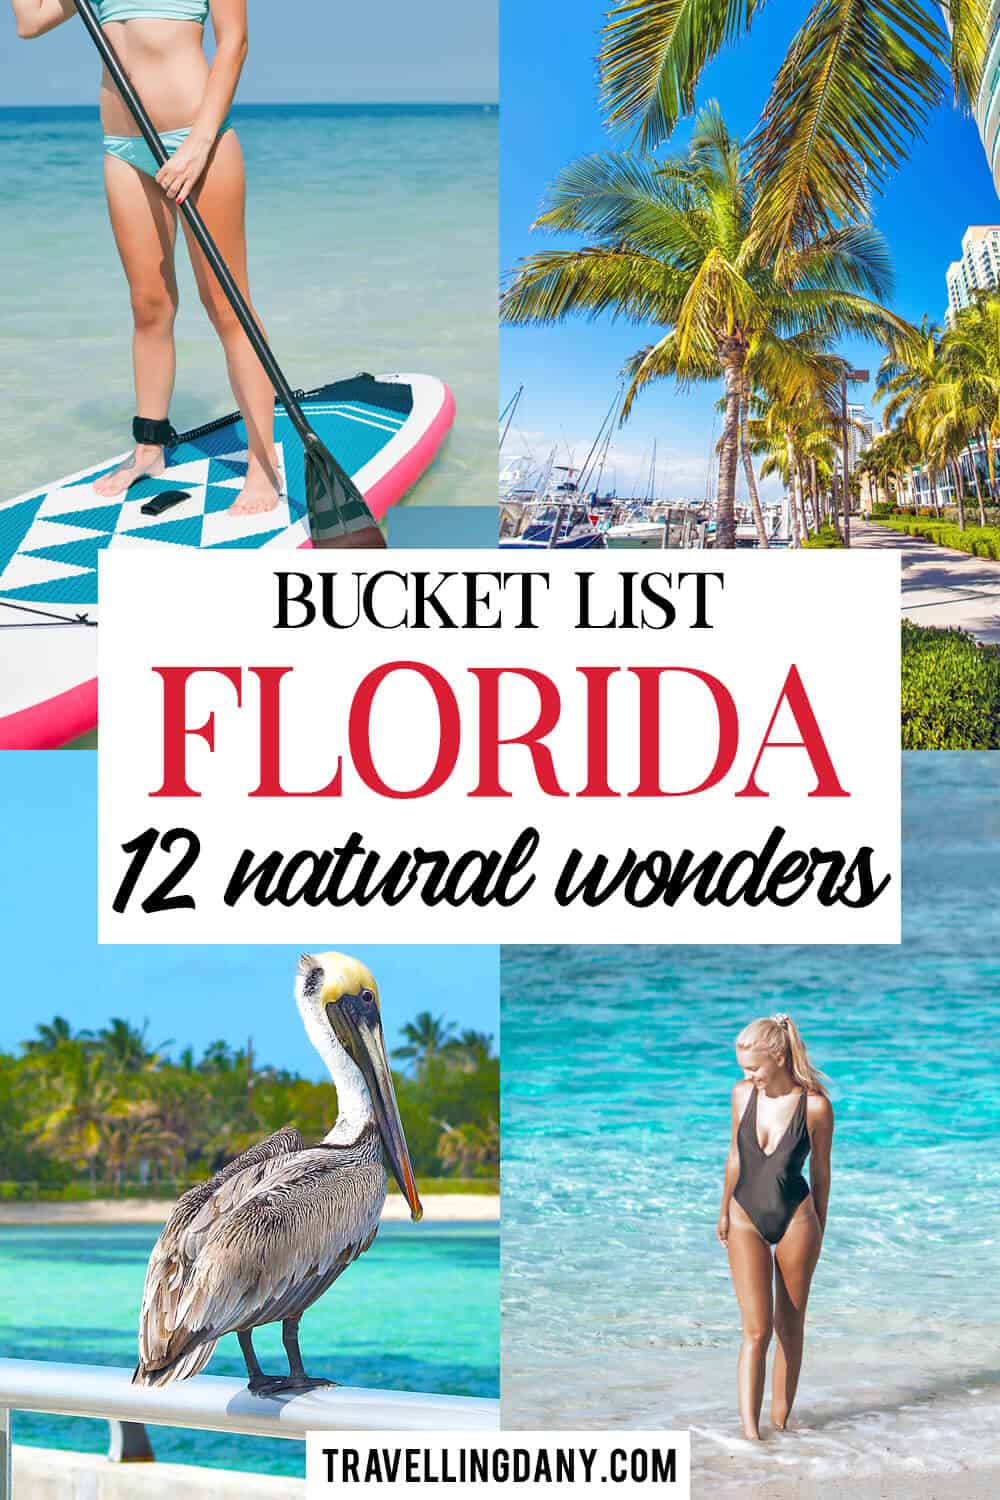 Are you planning your next trip? If you need some bucket list ideas, check out this list of 12 natural wonders in Florida you'll absolutely love! Discover the best natural parks in Florida, with info on how to get there and when you should go!